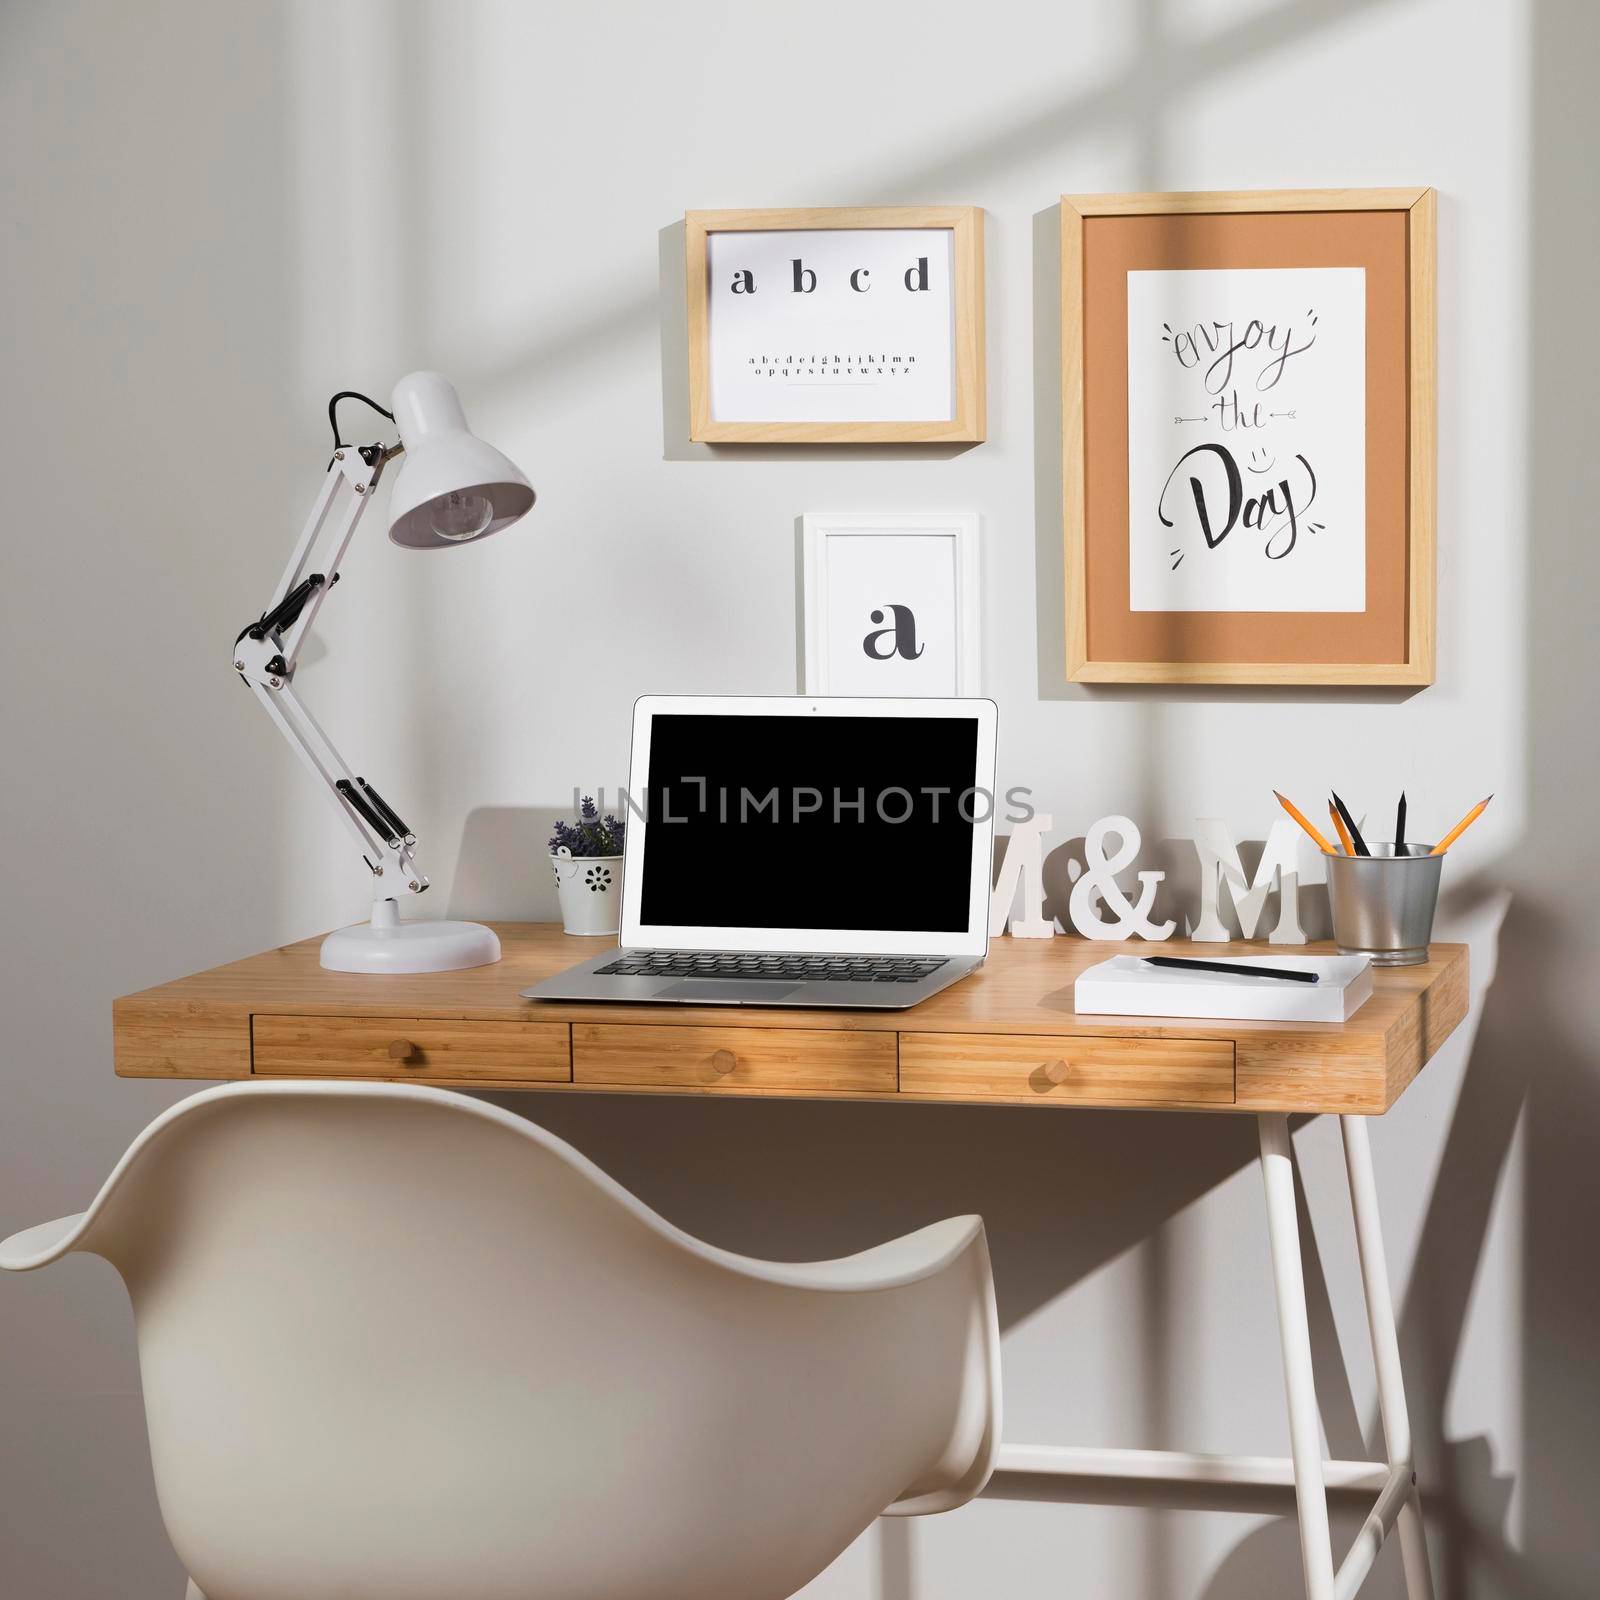 nice organised workspace with lamp. High quality photo by Zahard